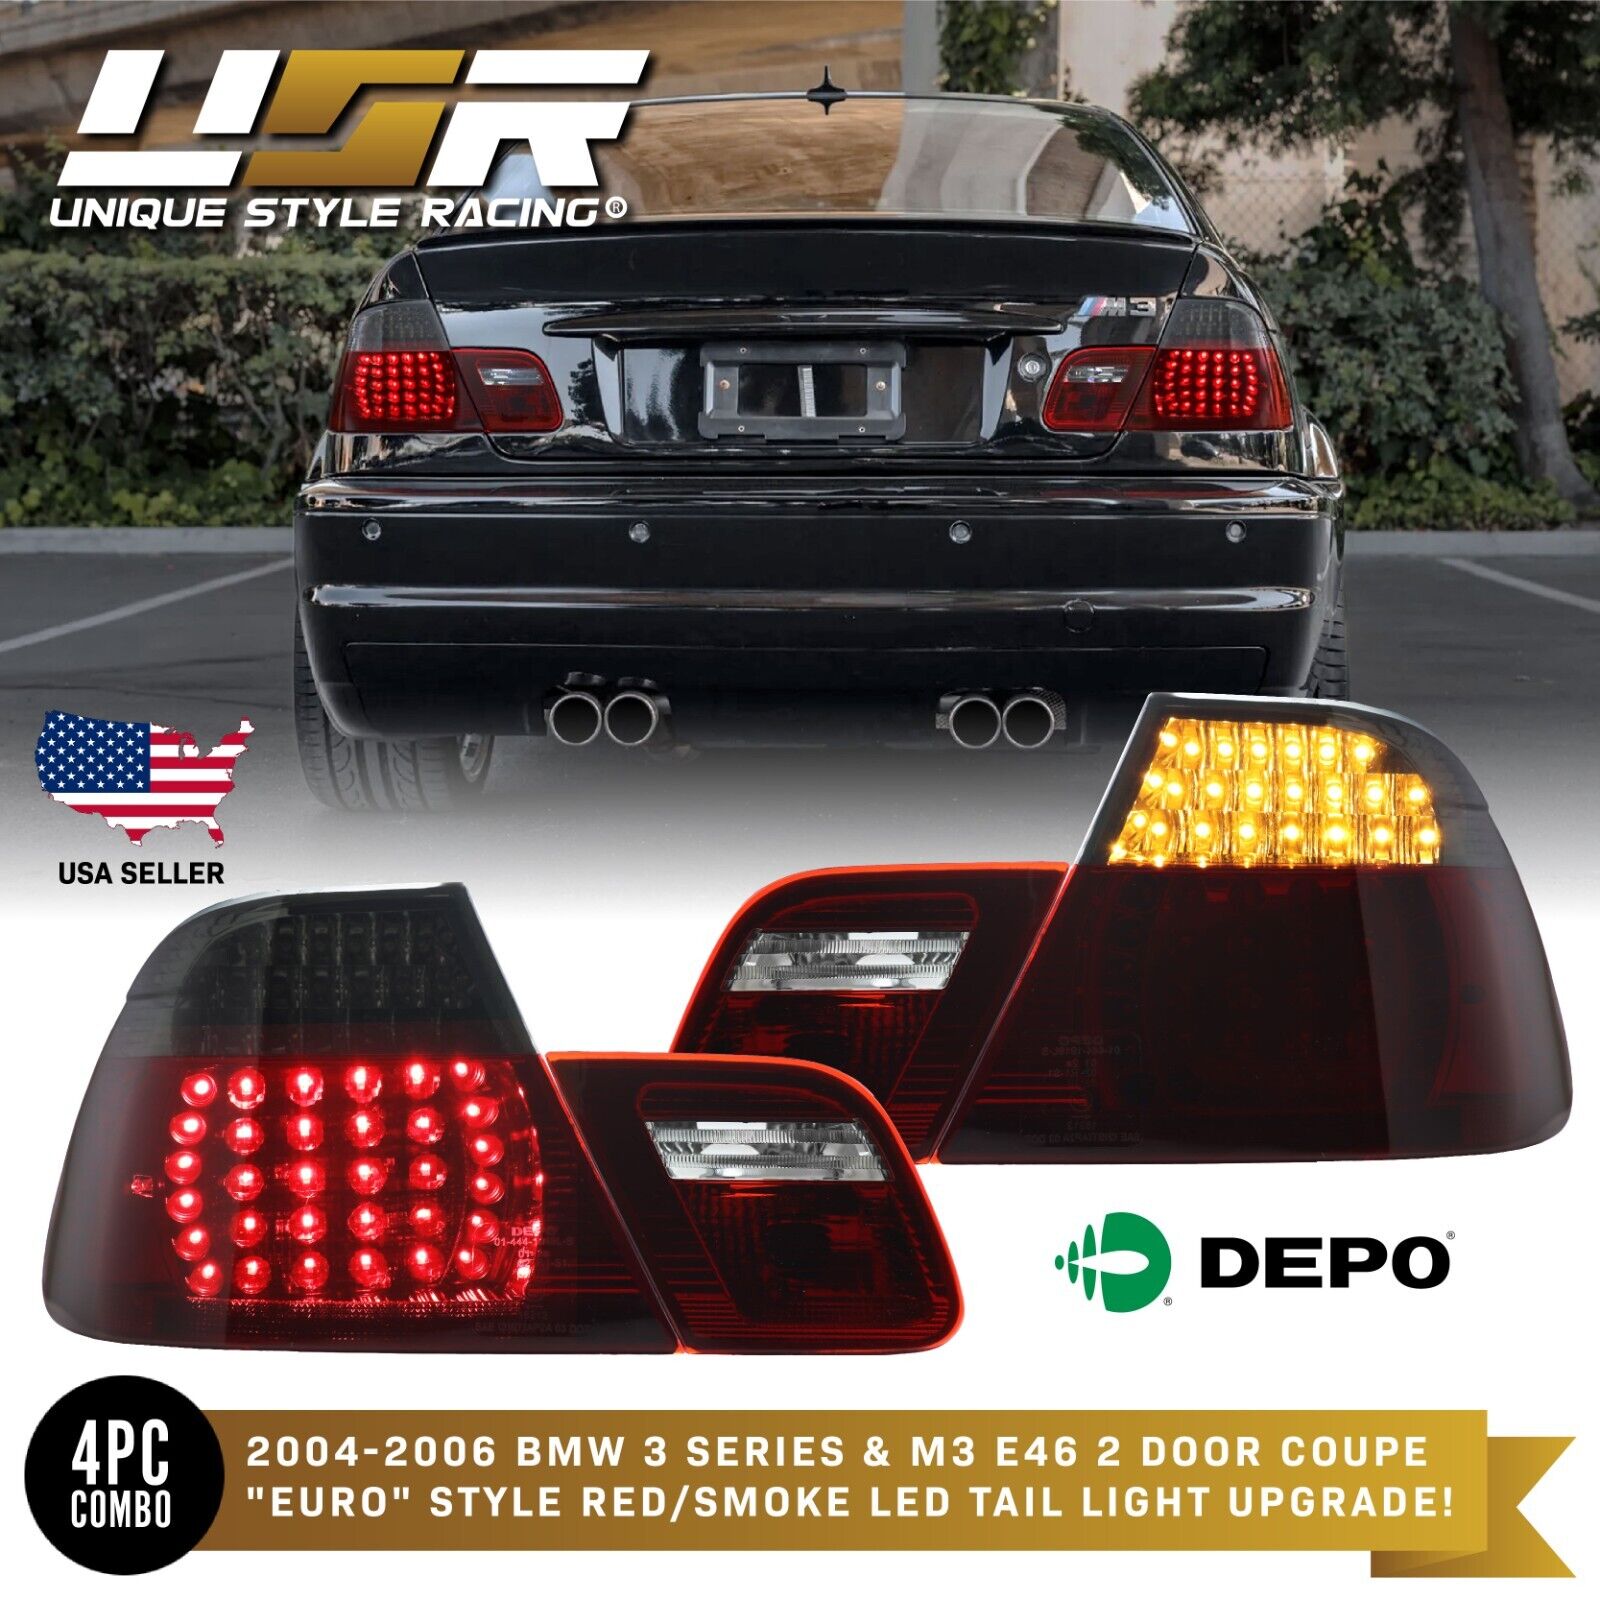 DEPO OEM Replacement Red/Smoke LED Tail Light Lamp For 2004-06 BMW E46 2D Coupe